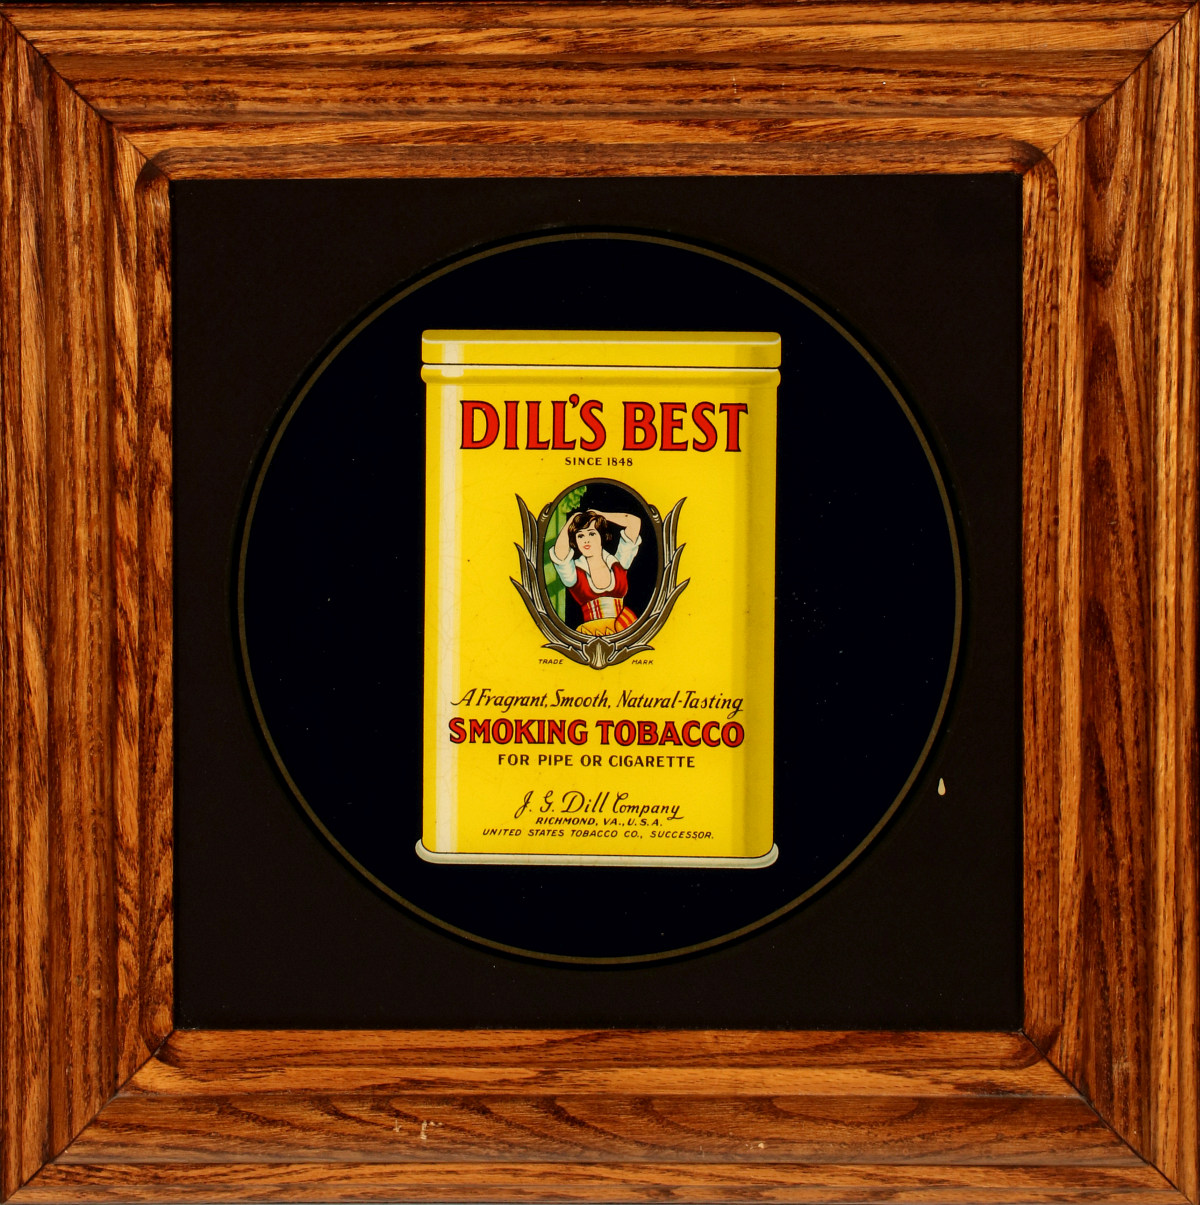 A RARE PAINTED GLASS SIGN FOR DILL'S BEST TOBACCO